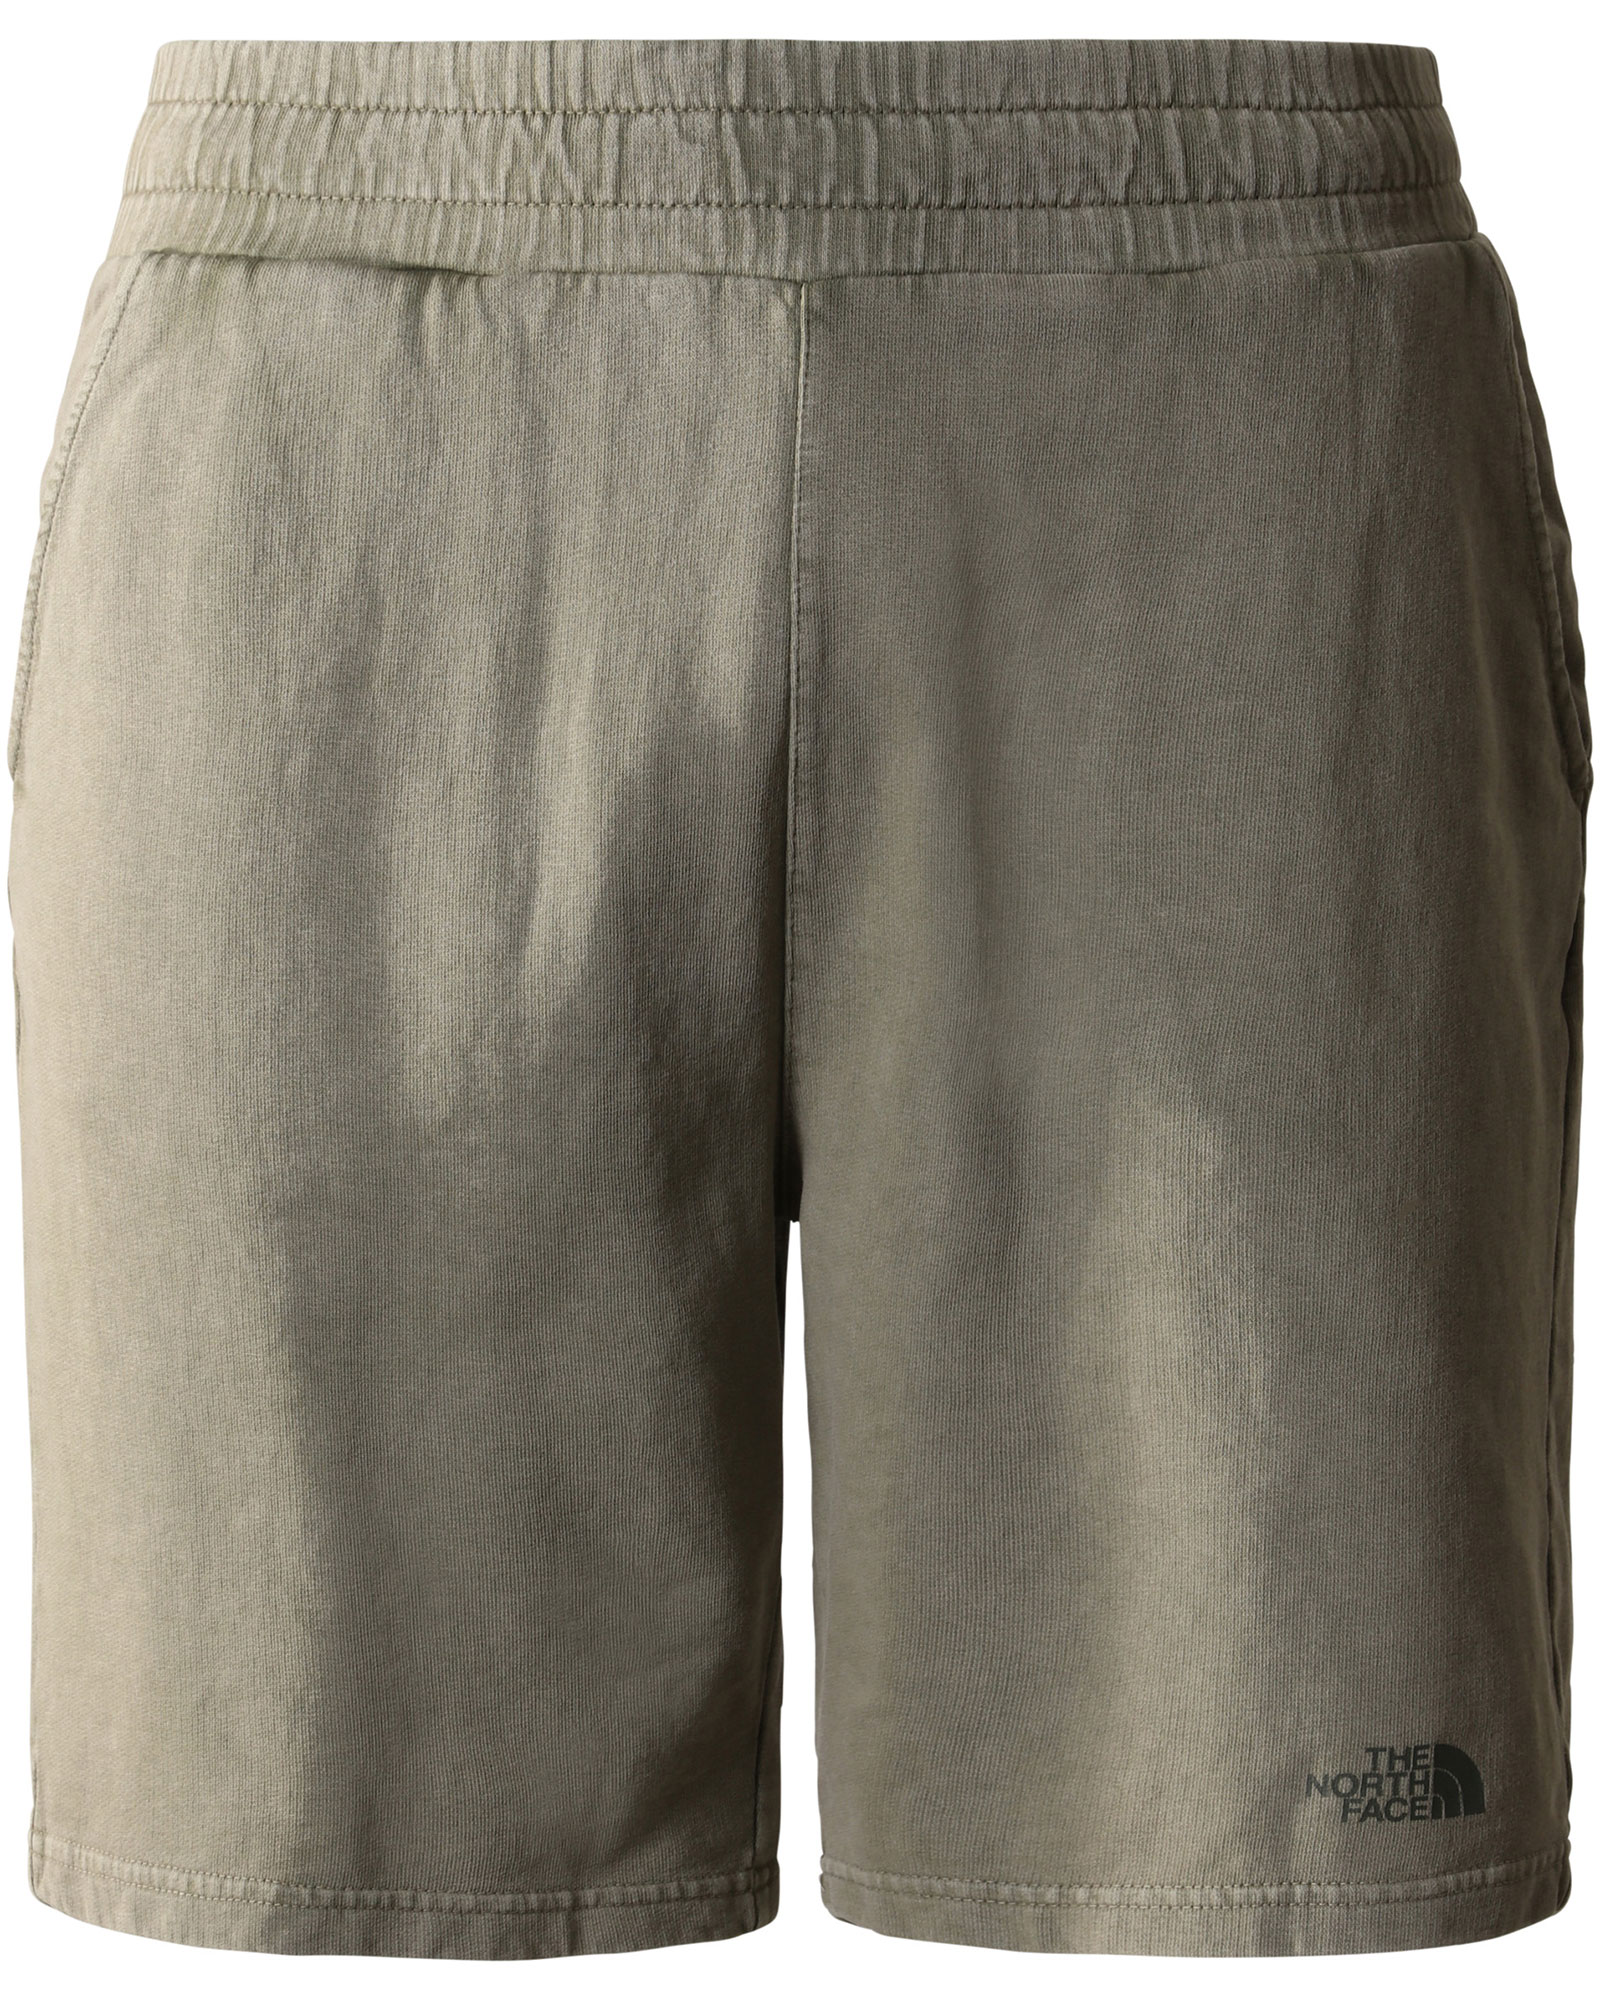 The North Face Men’s Heritage Dye Pack Shorts - New Taupe Green L